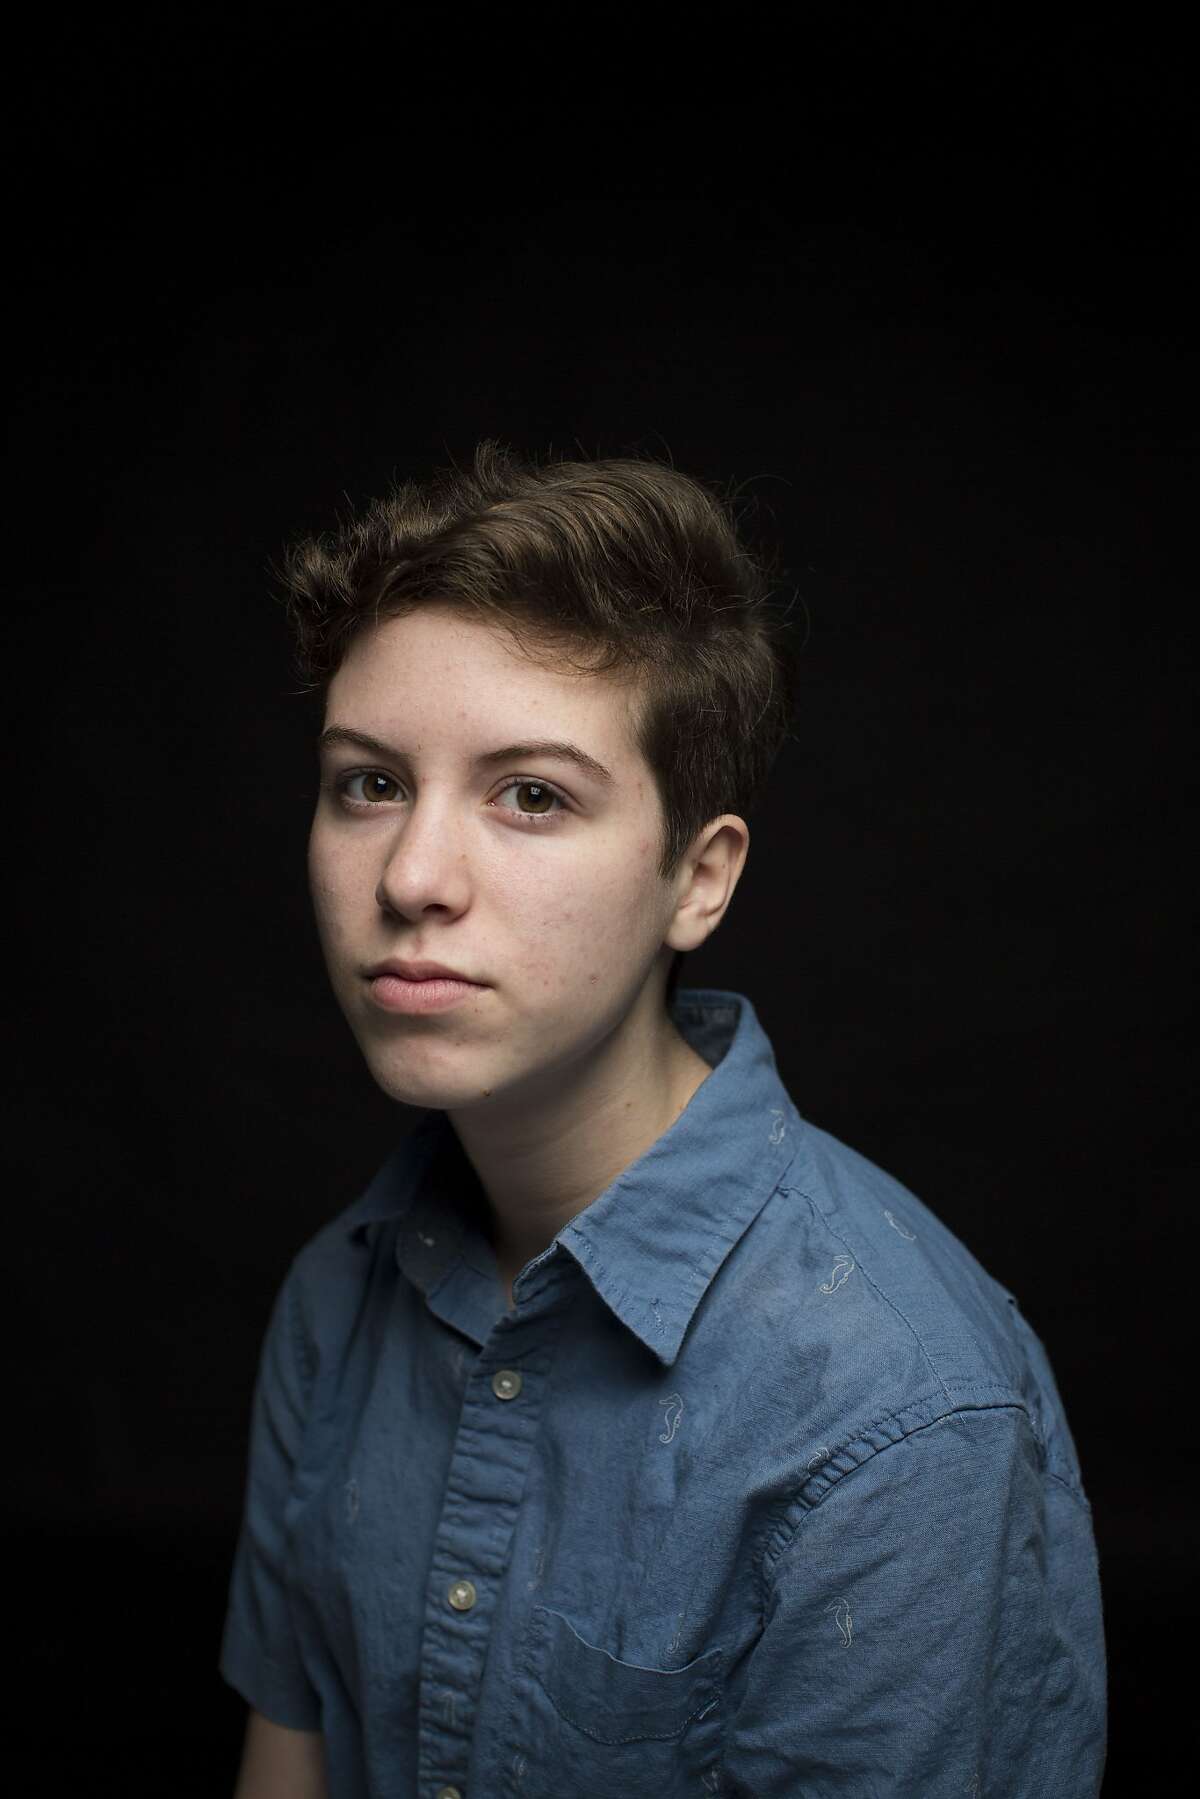 Jackson Farner, who is transgender, sits for a portrait in the Express-News studio in San Antonio, Texas on October 2, 2016.